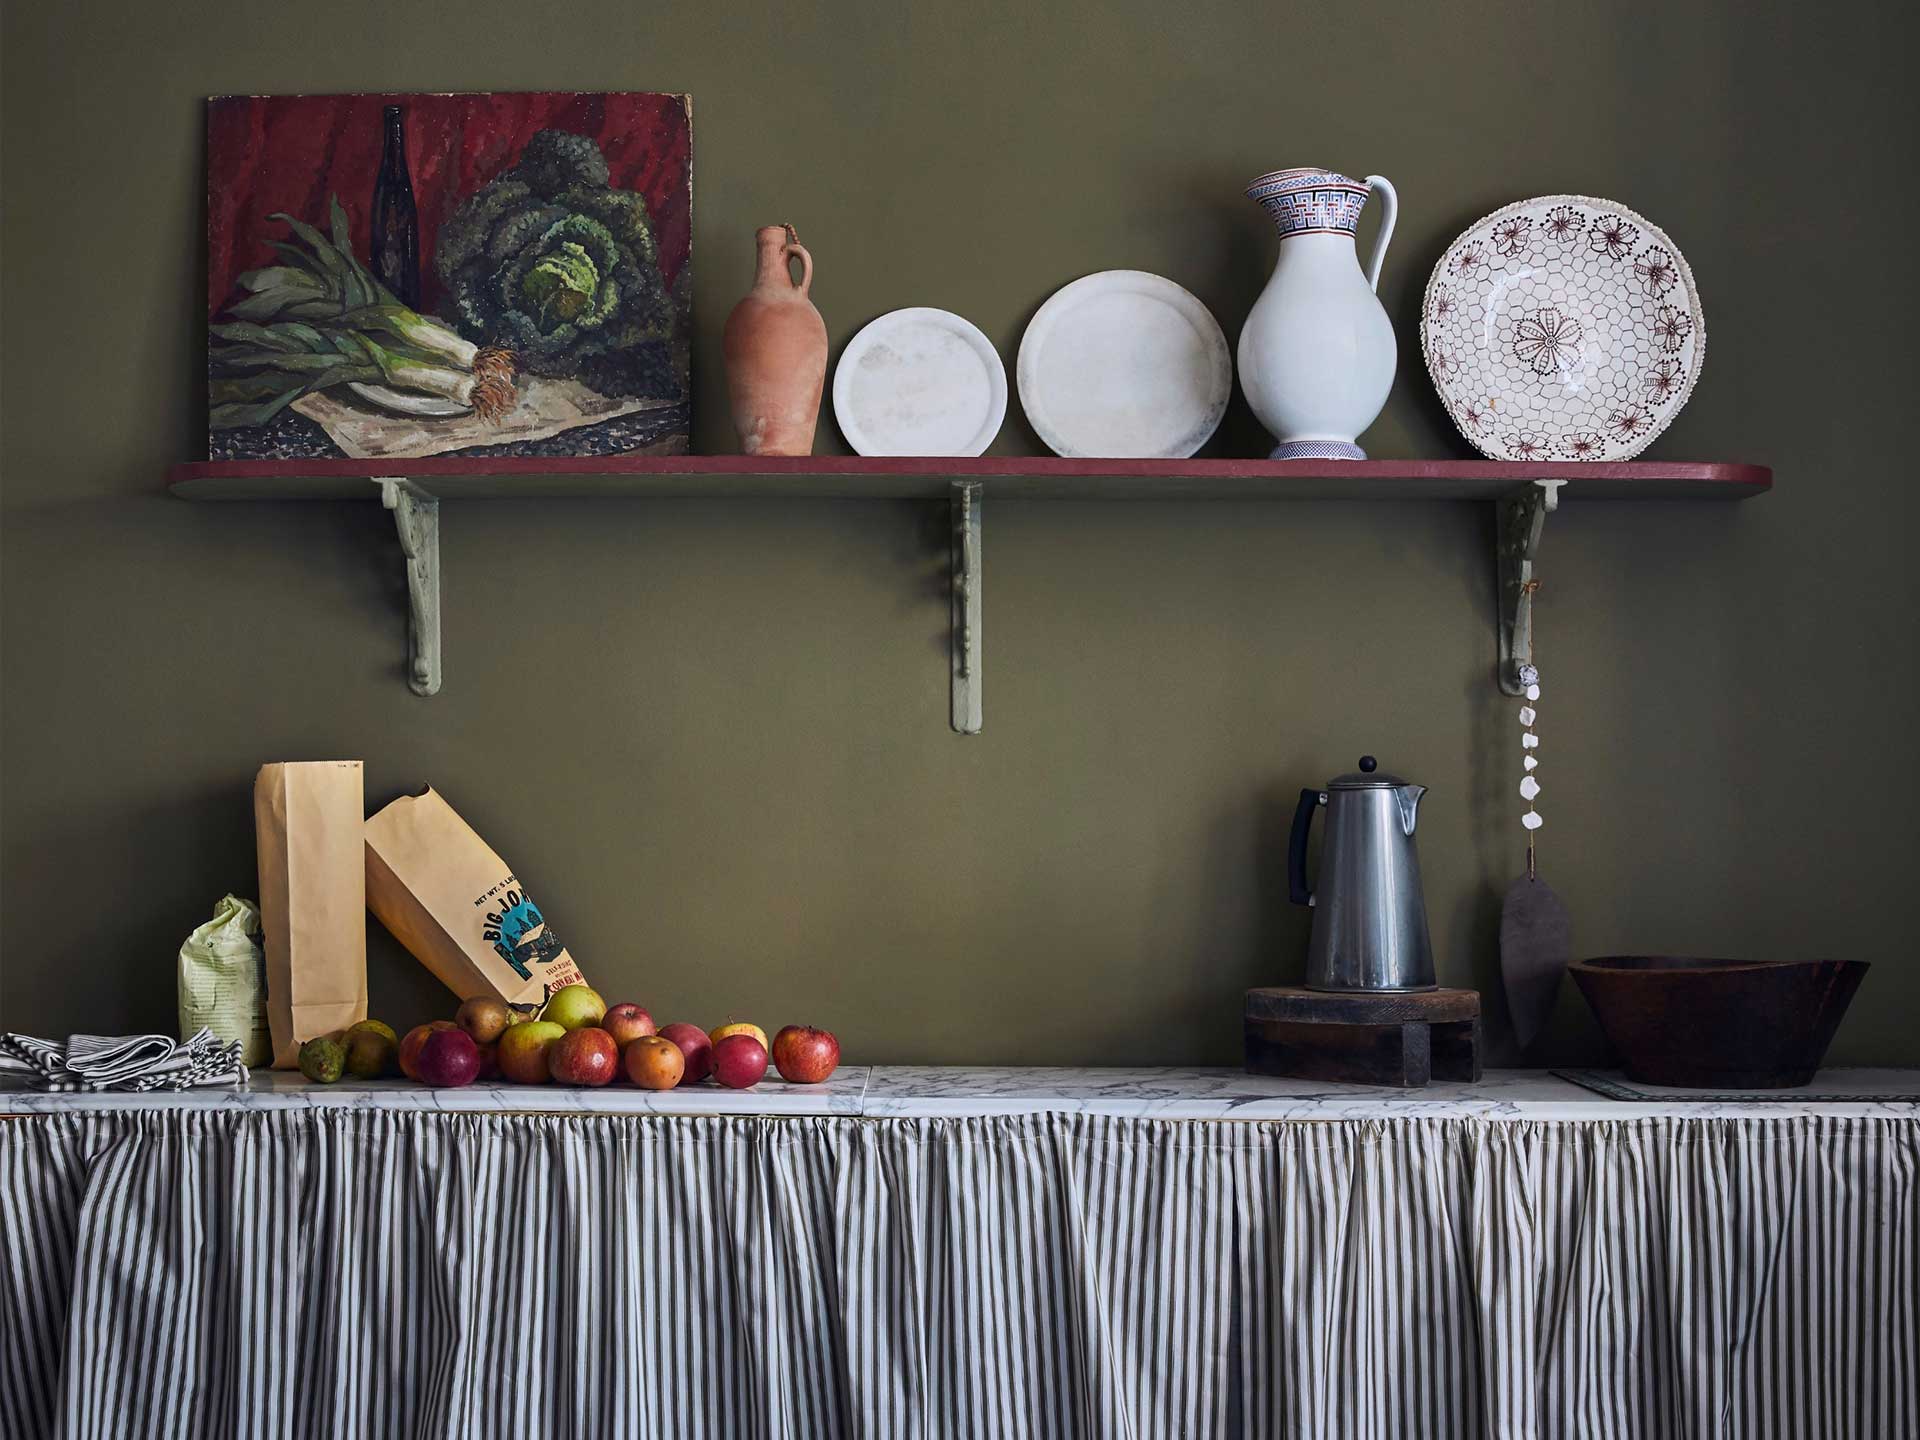 A shelf is the perfect way to display your plates in your home